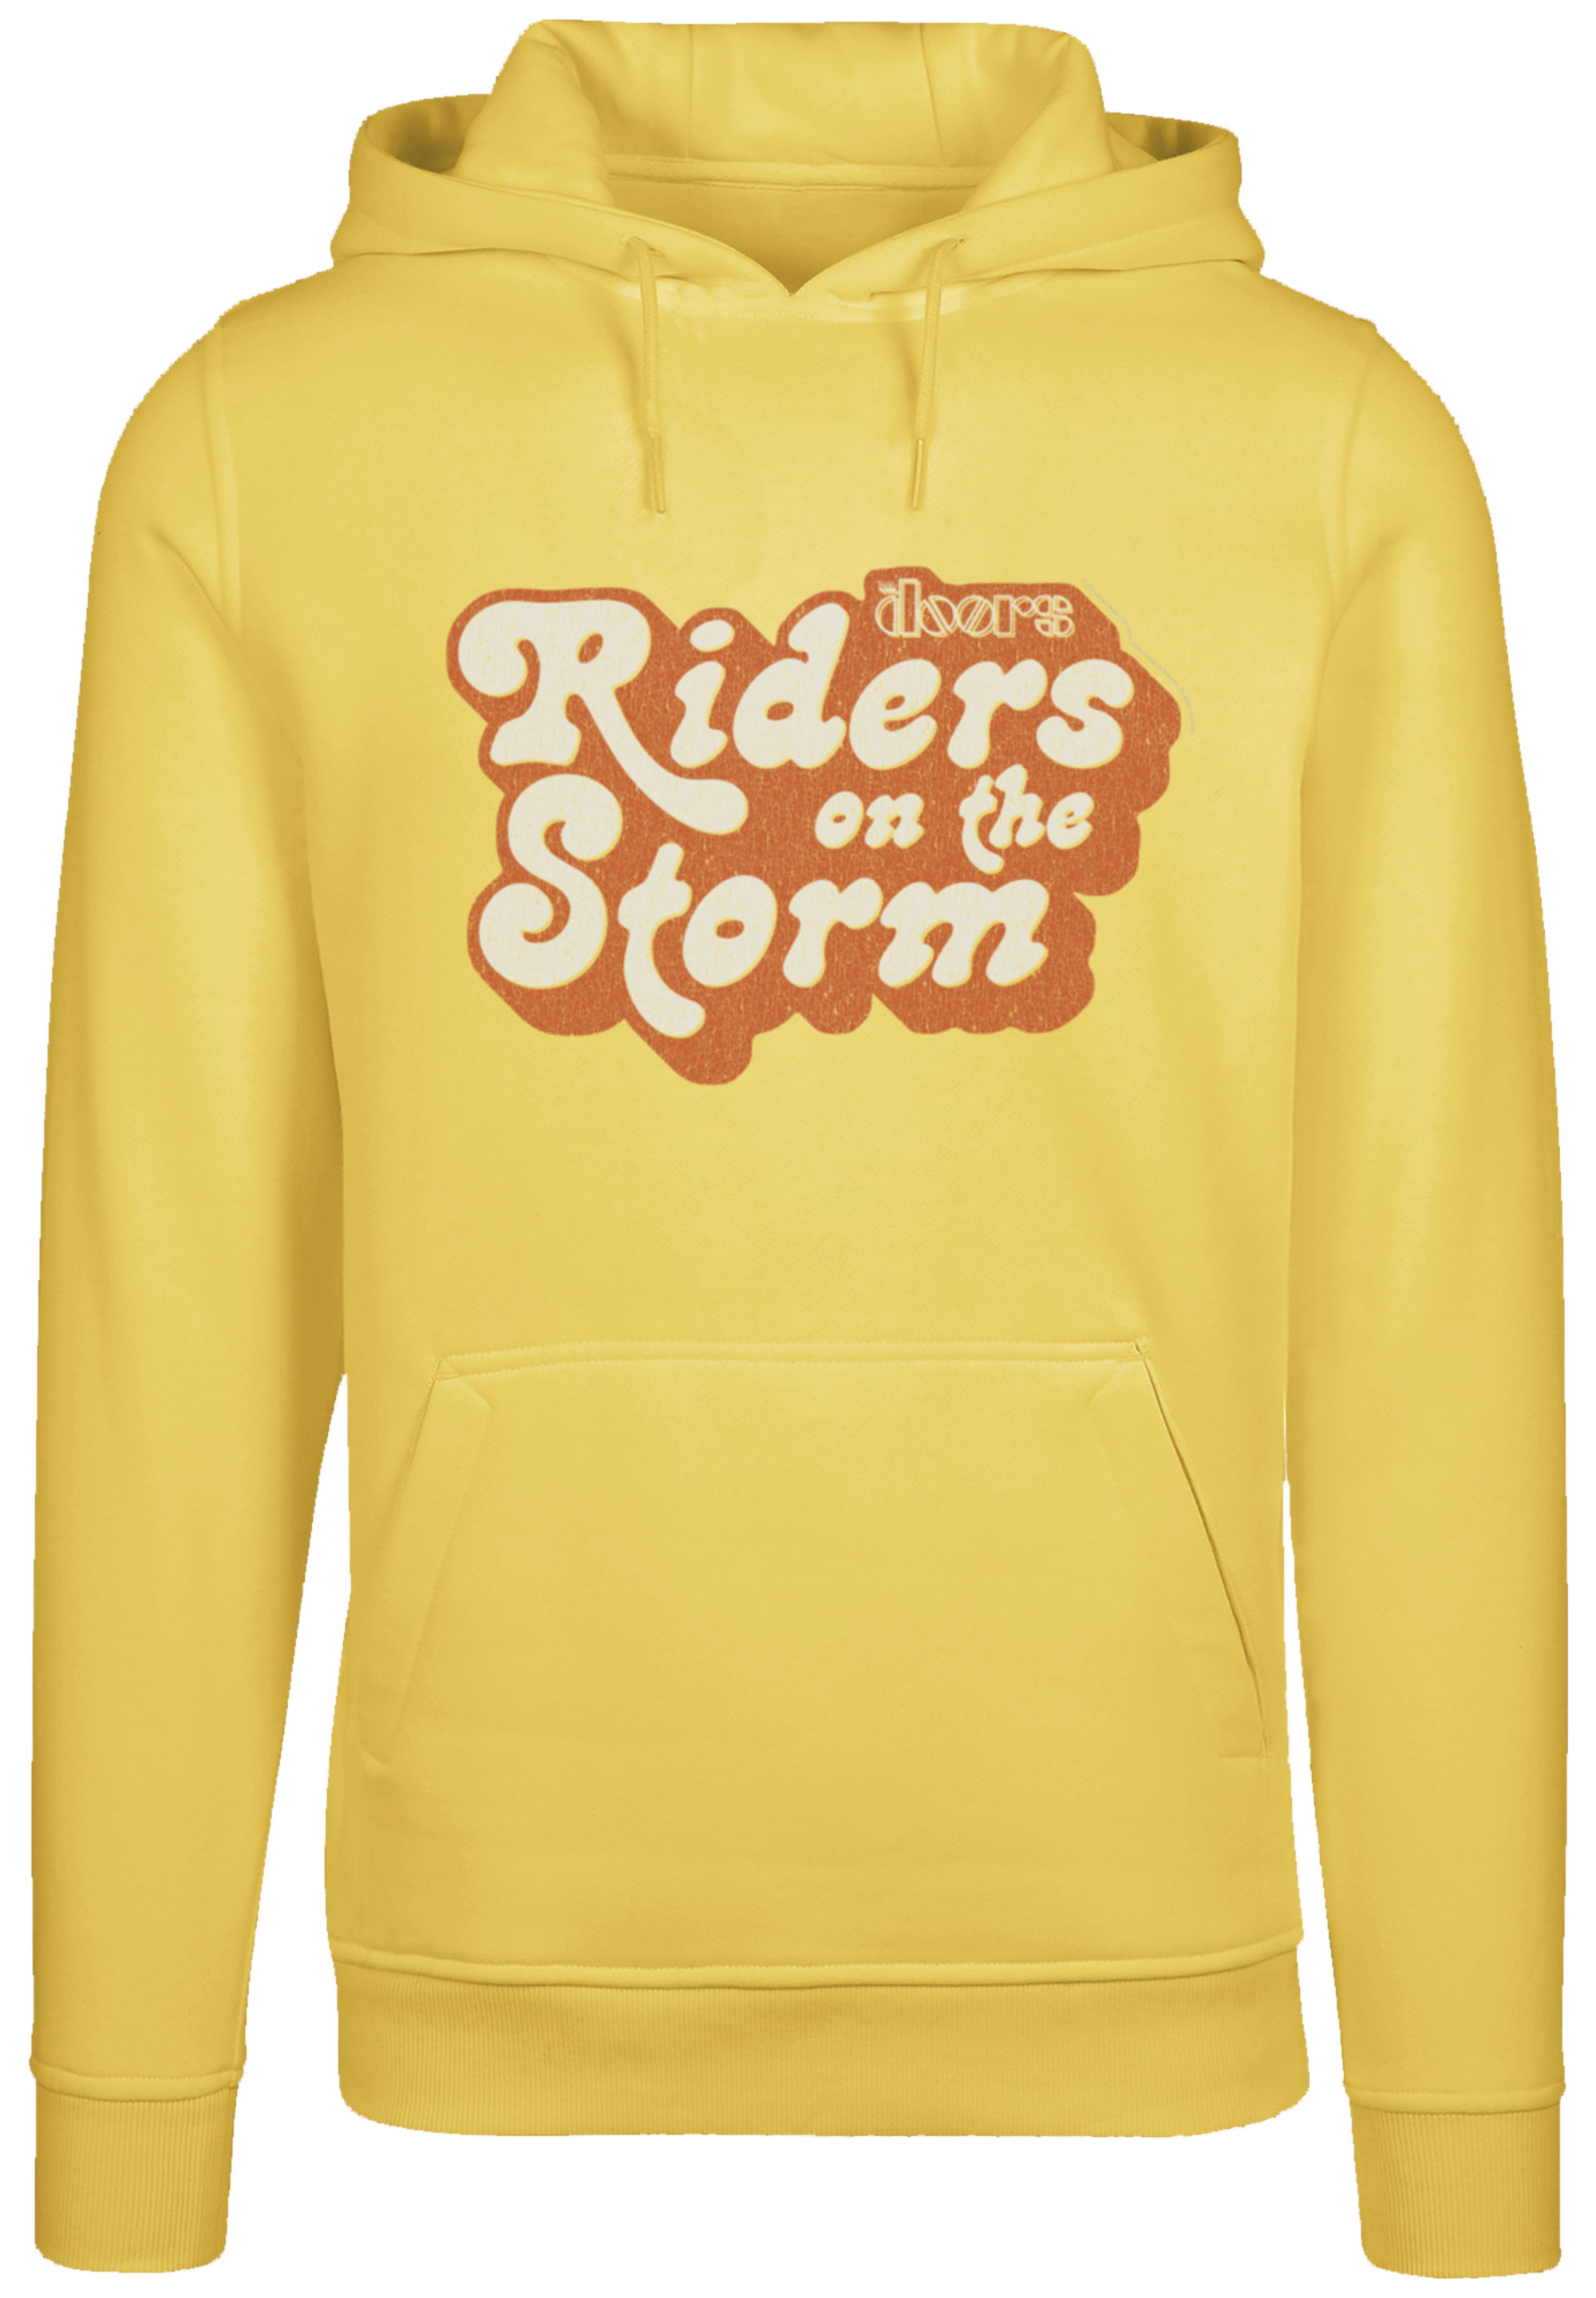 Пуловер F4NT4STIC Hoodie The Doors Music Band Riders on the Storm Logo, цвет taxi yellow